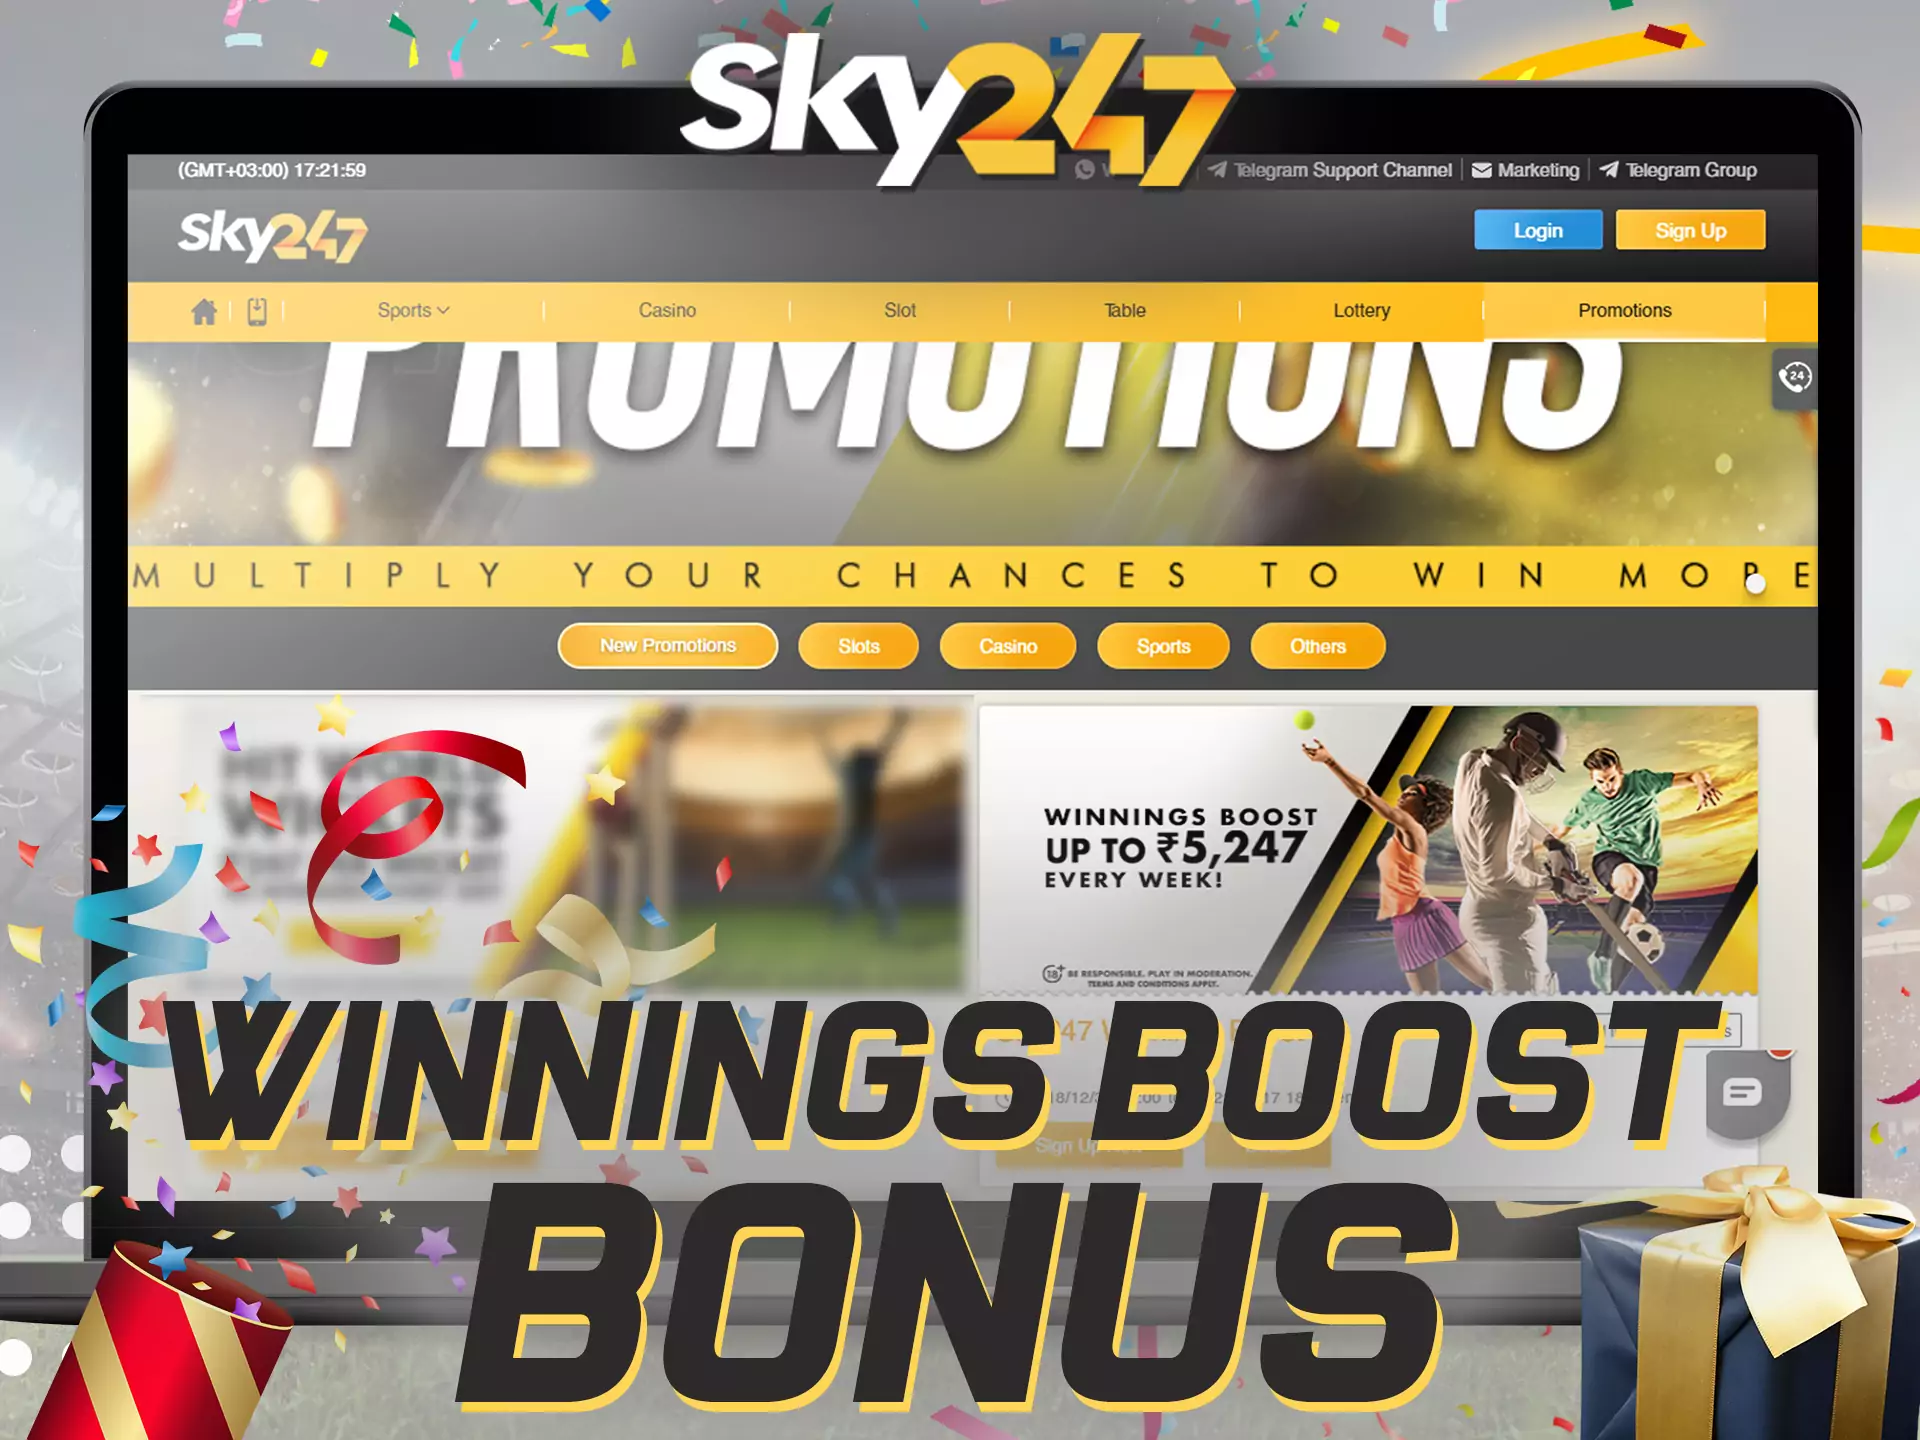 On Sky247 there is a bonus offer of winnings boost among others.